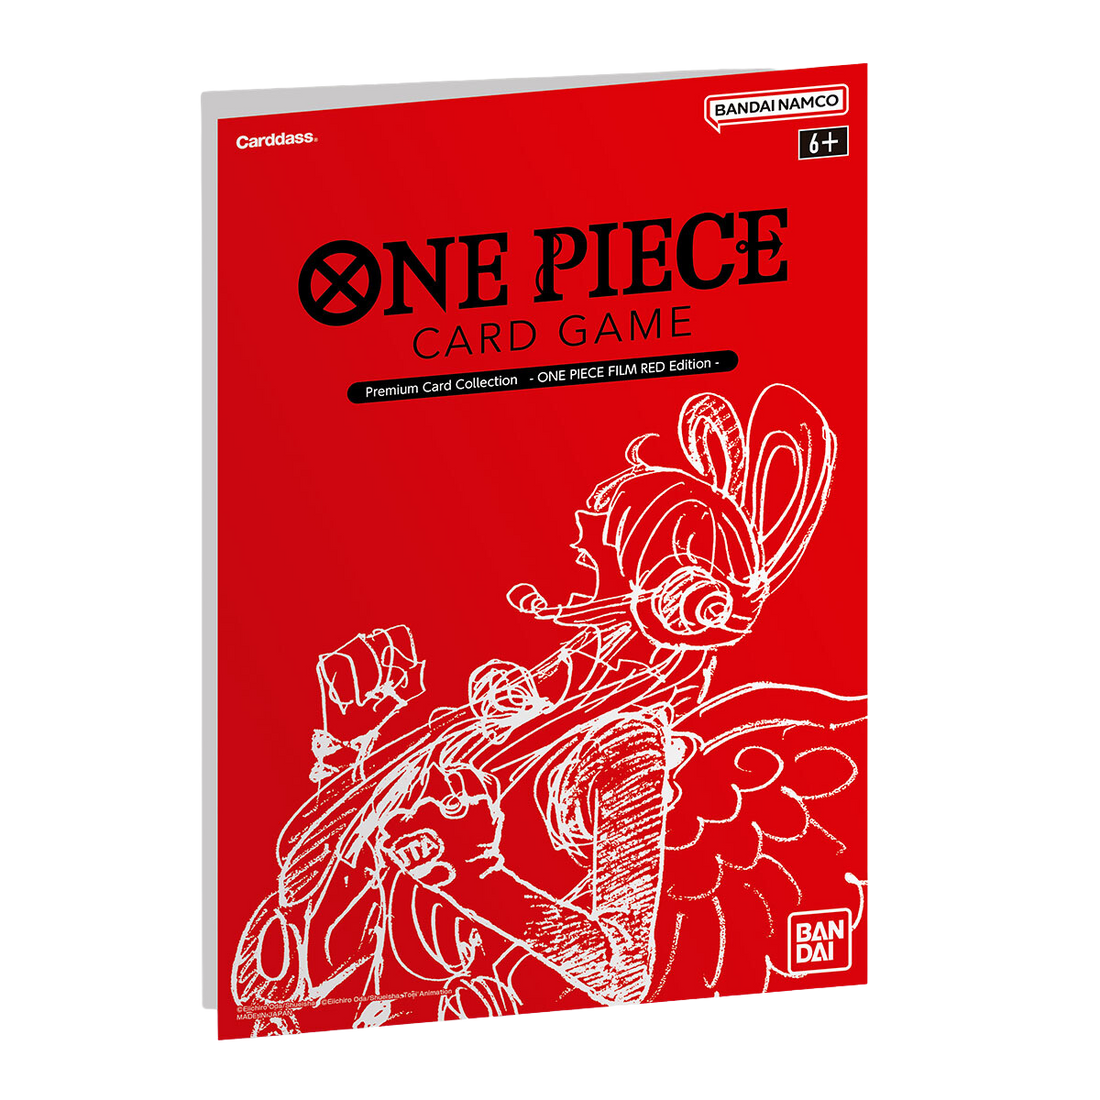 One Piece Card Game - Premium Card Collection - Film Red Edition - EN